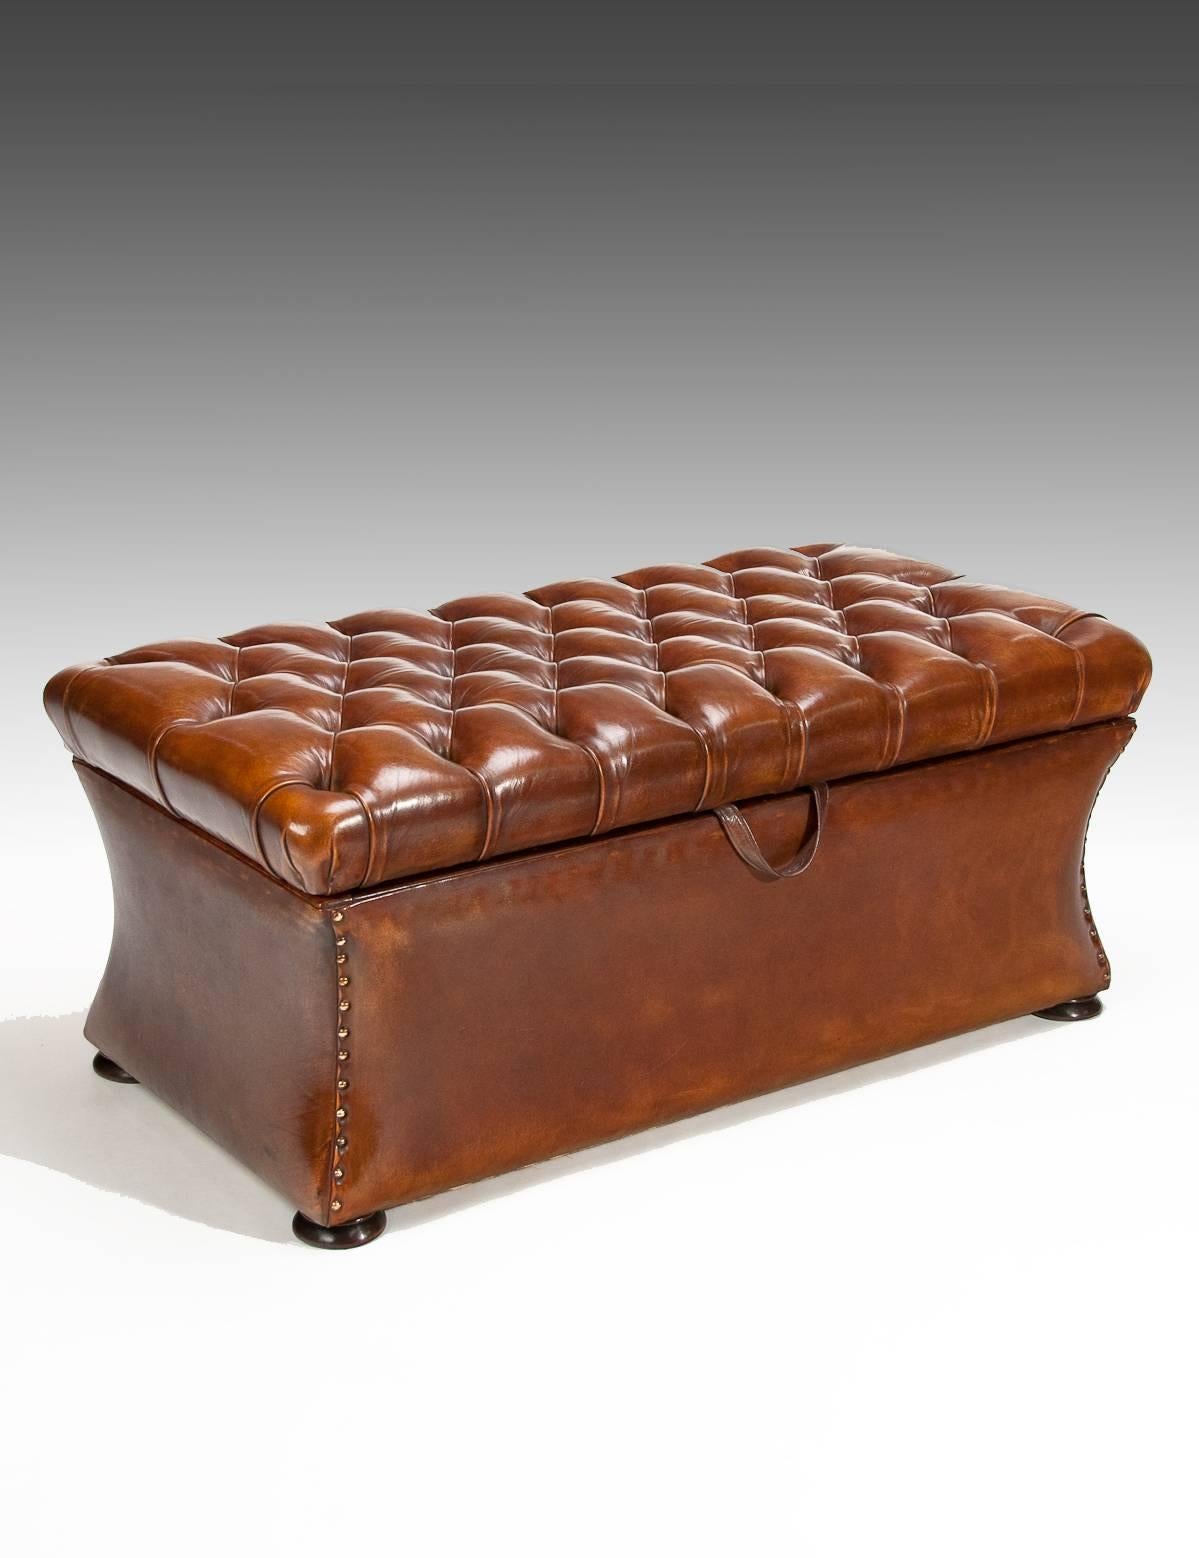 A very good quality late 19th century circa 1880 shaped leather upholstered deep buttoned ottoman. 

The deep leather buttoned top lifts up to reveal a lined storage compartment. Beneath the top the shaped structure being leather lined with brass